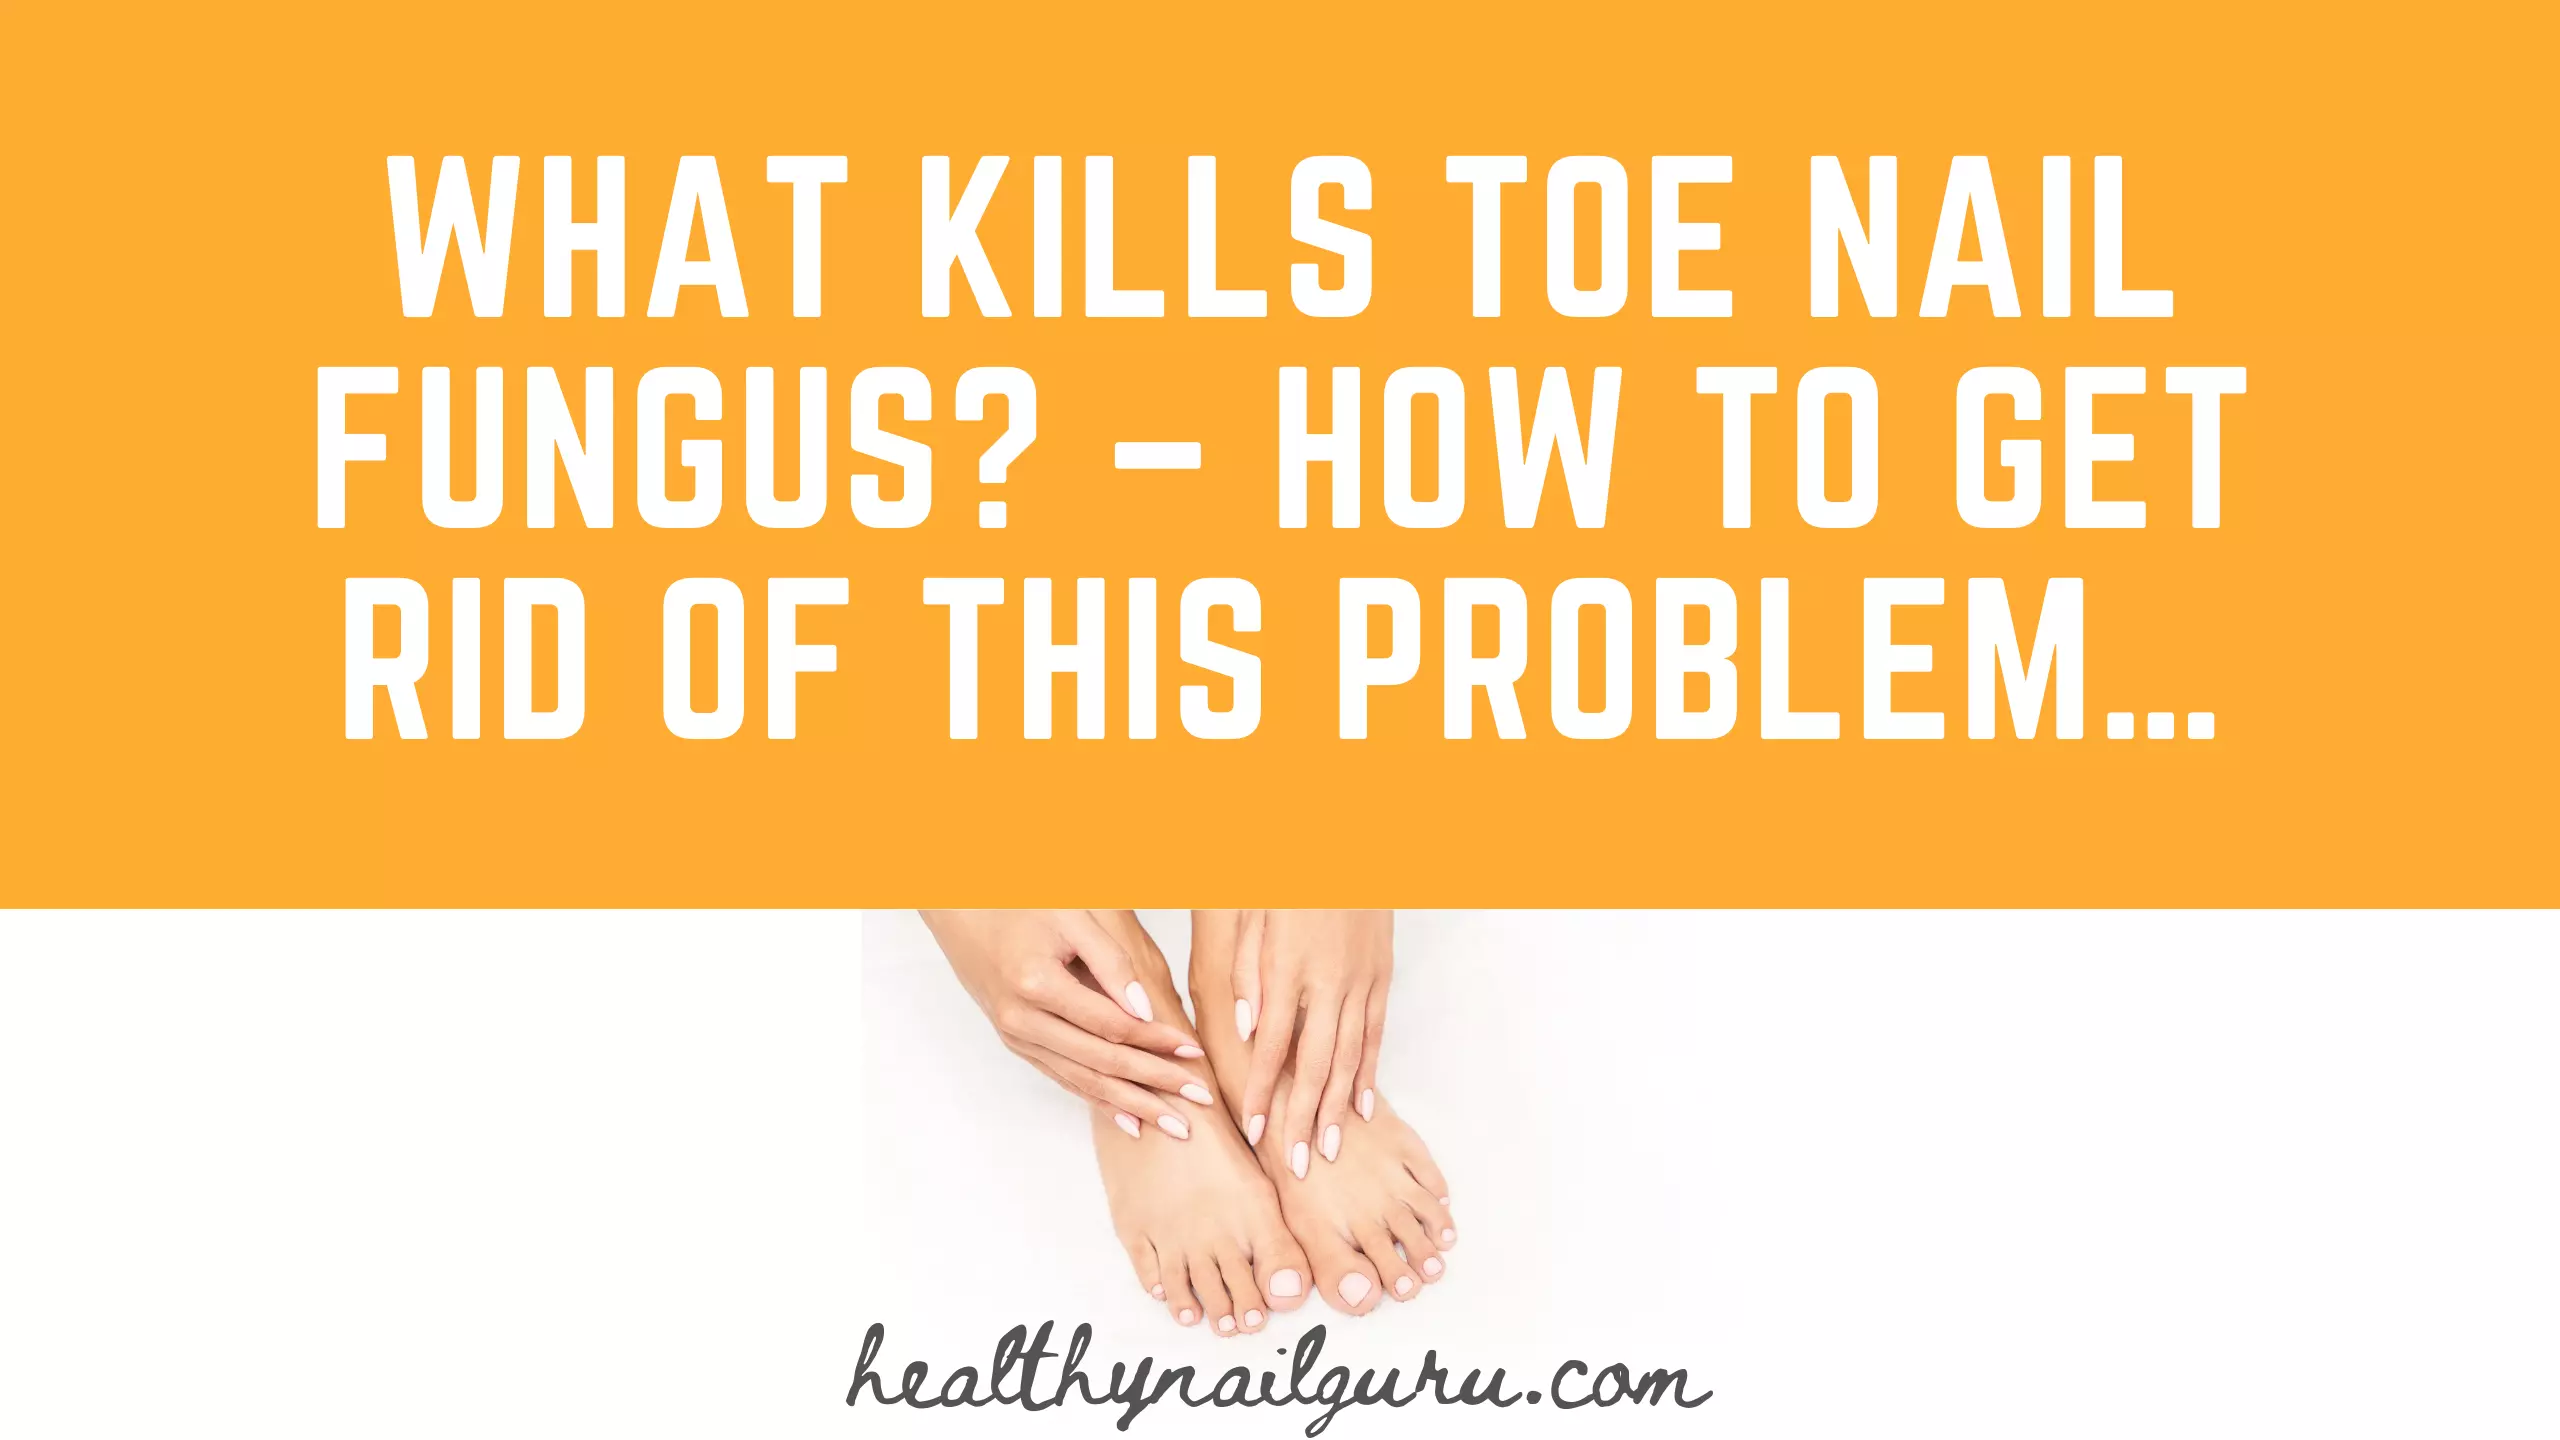 What Kills Toe Nail Fungus How To Get Rid Of This Problem